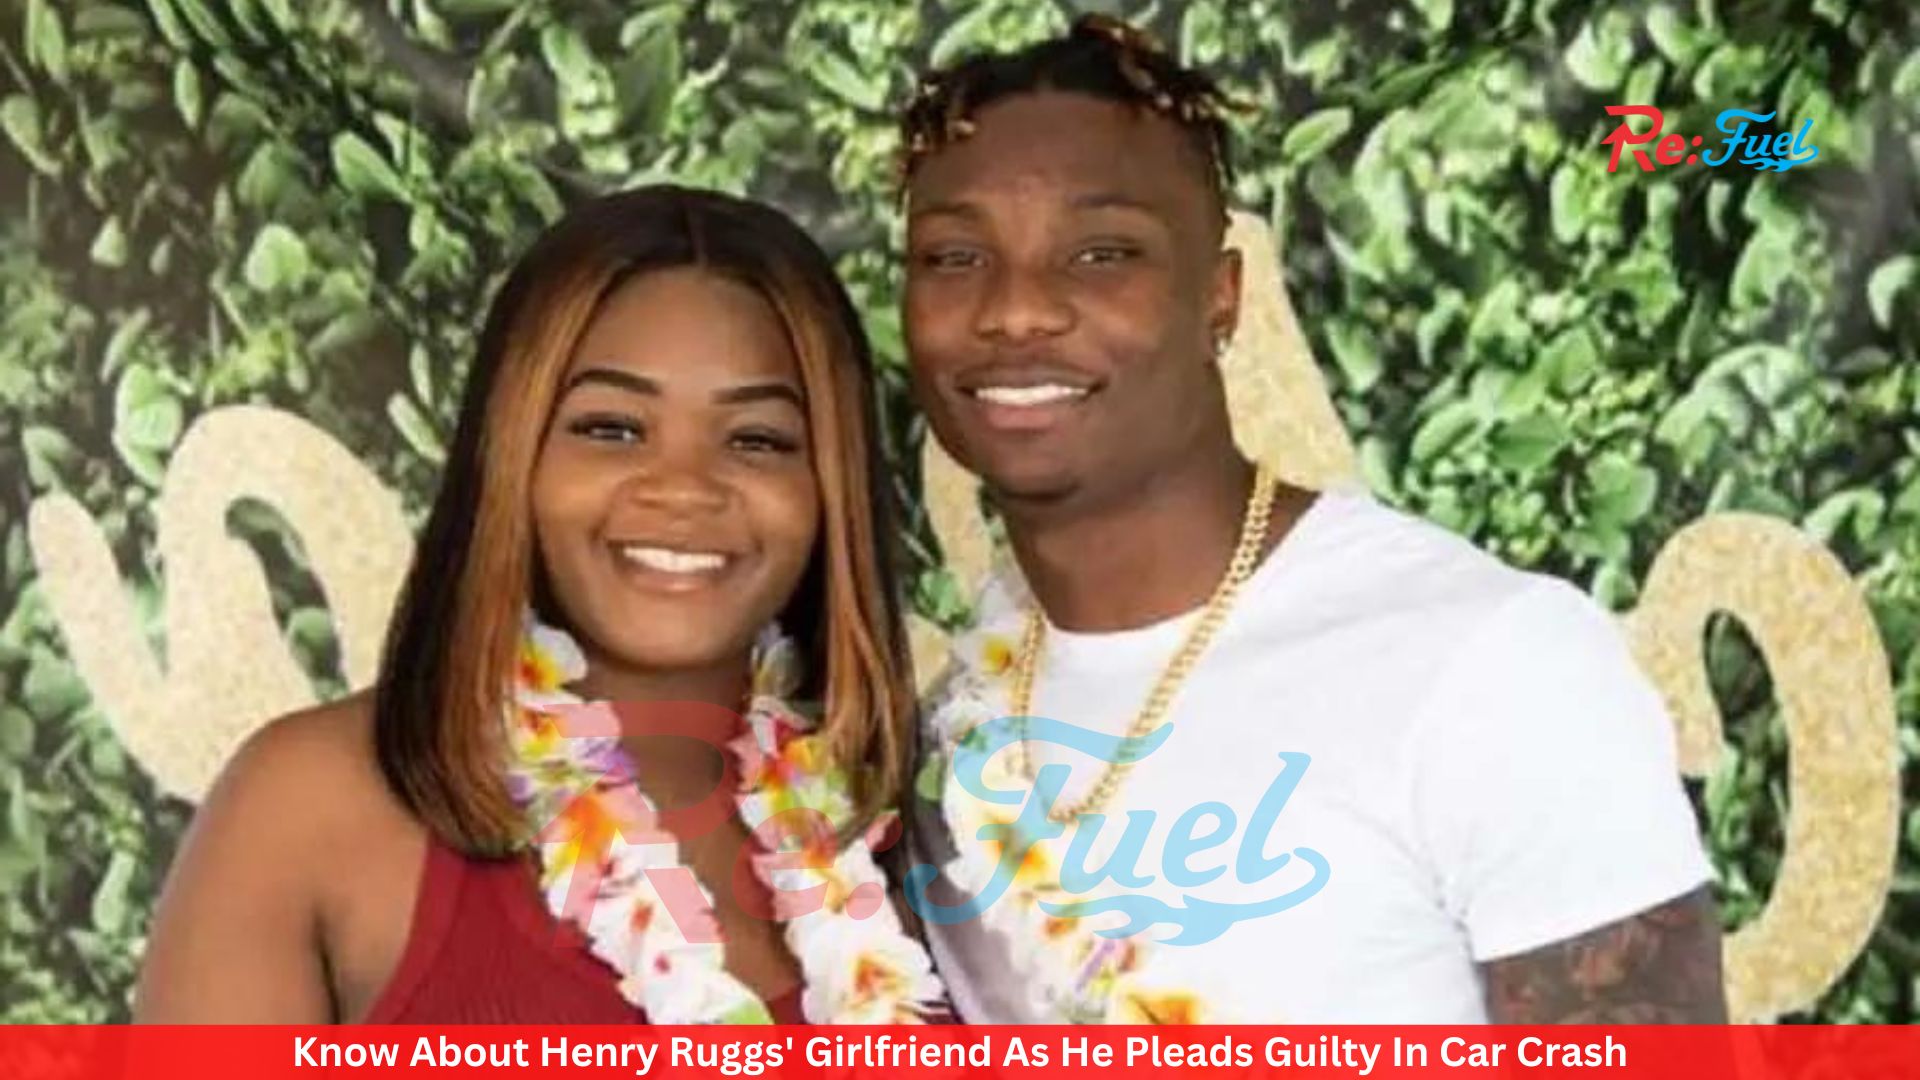 Know About Henry Ruggs' Girlfriend As He Pleads Guilty In Car Crash